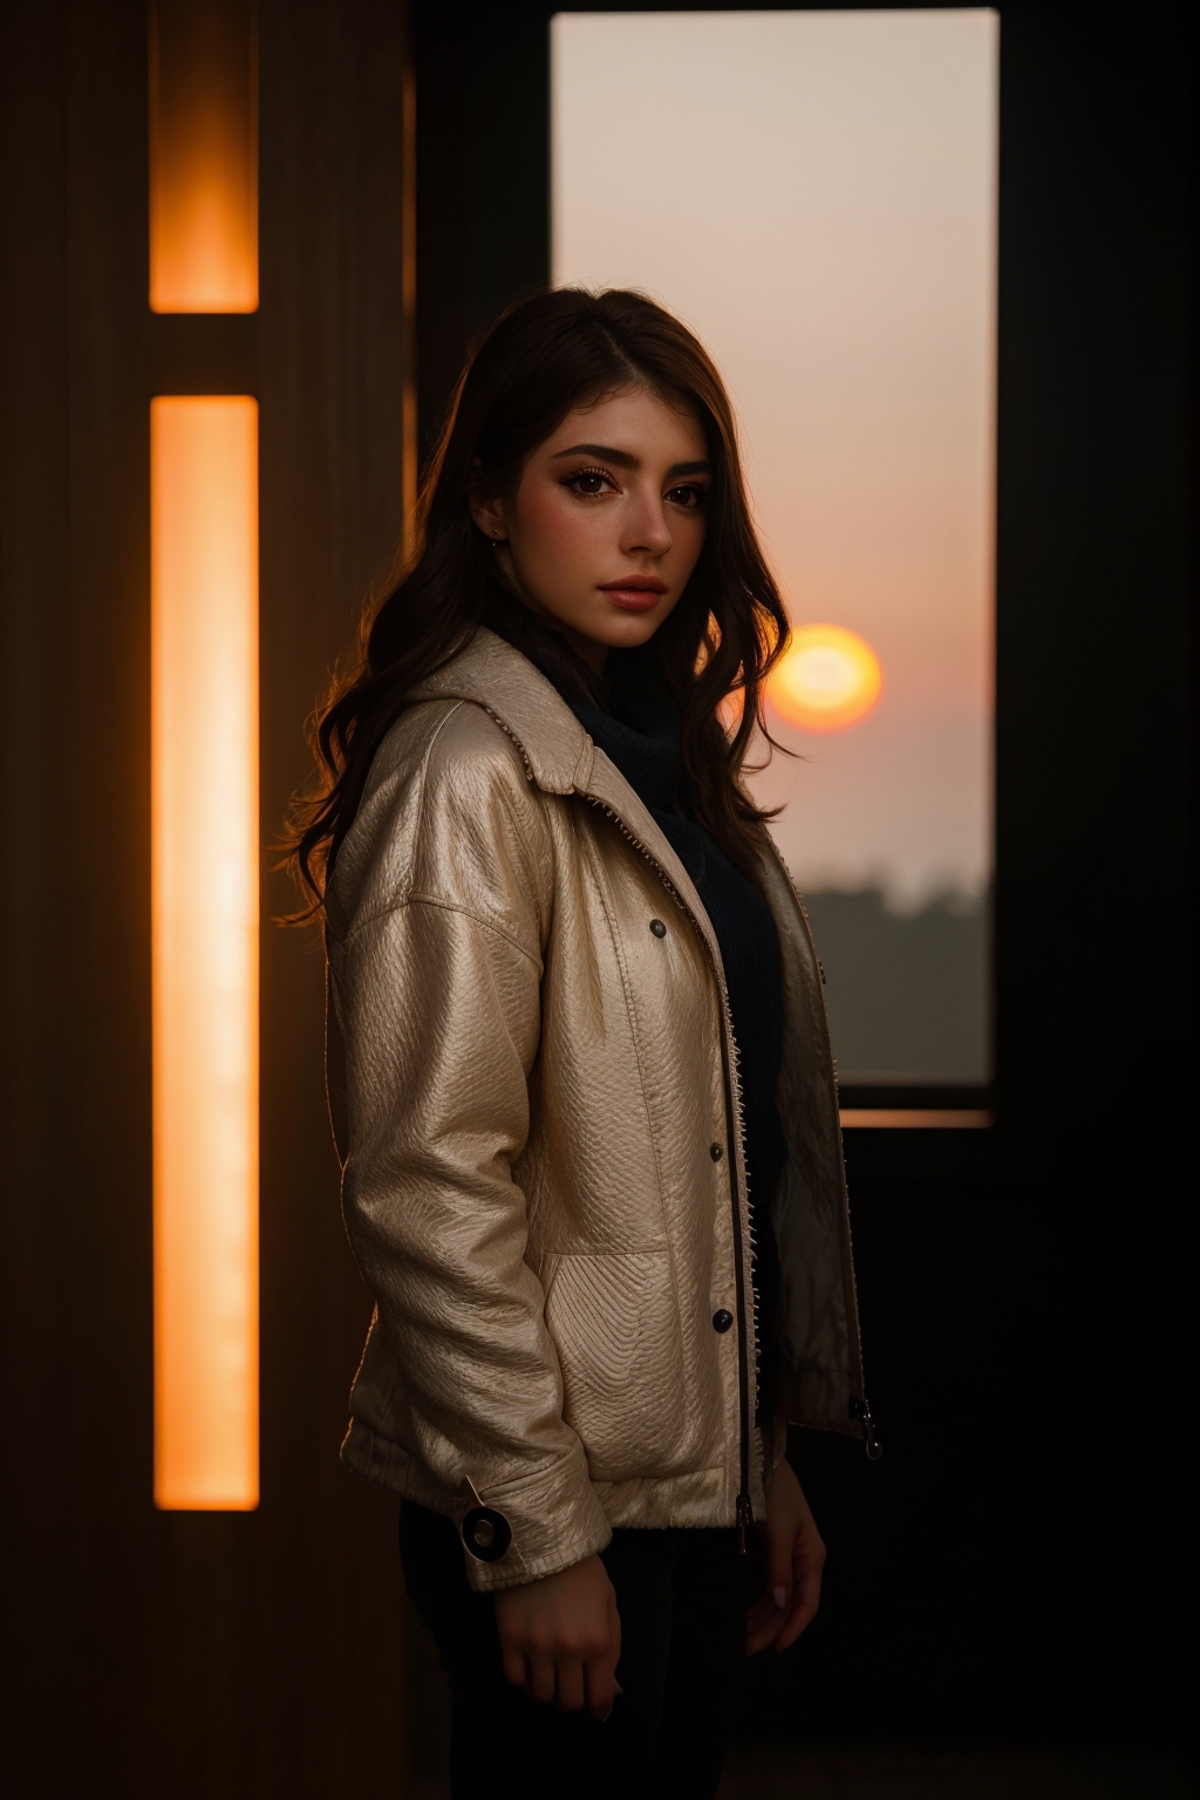 Chrissy Costanza  image by lasers